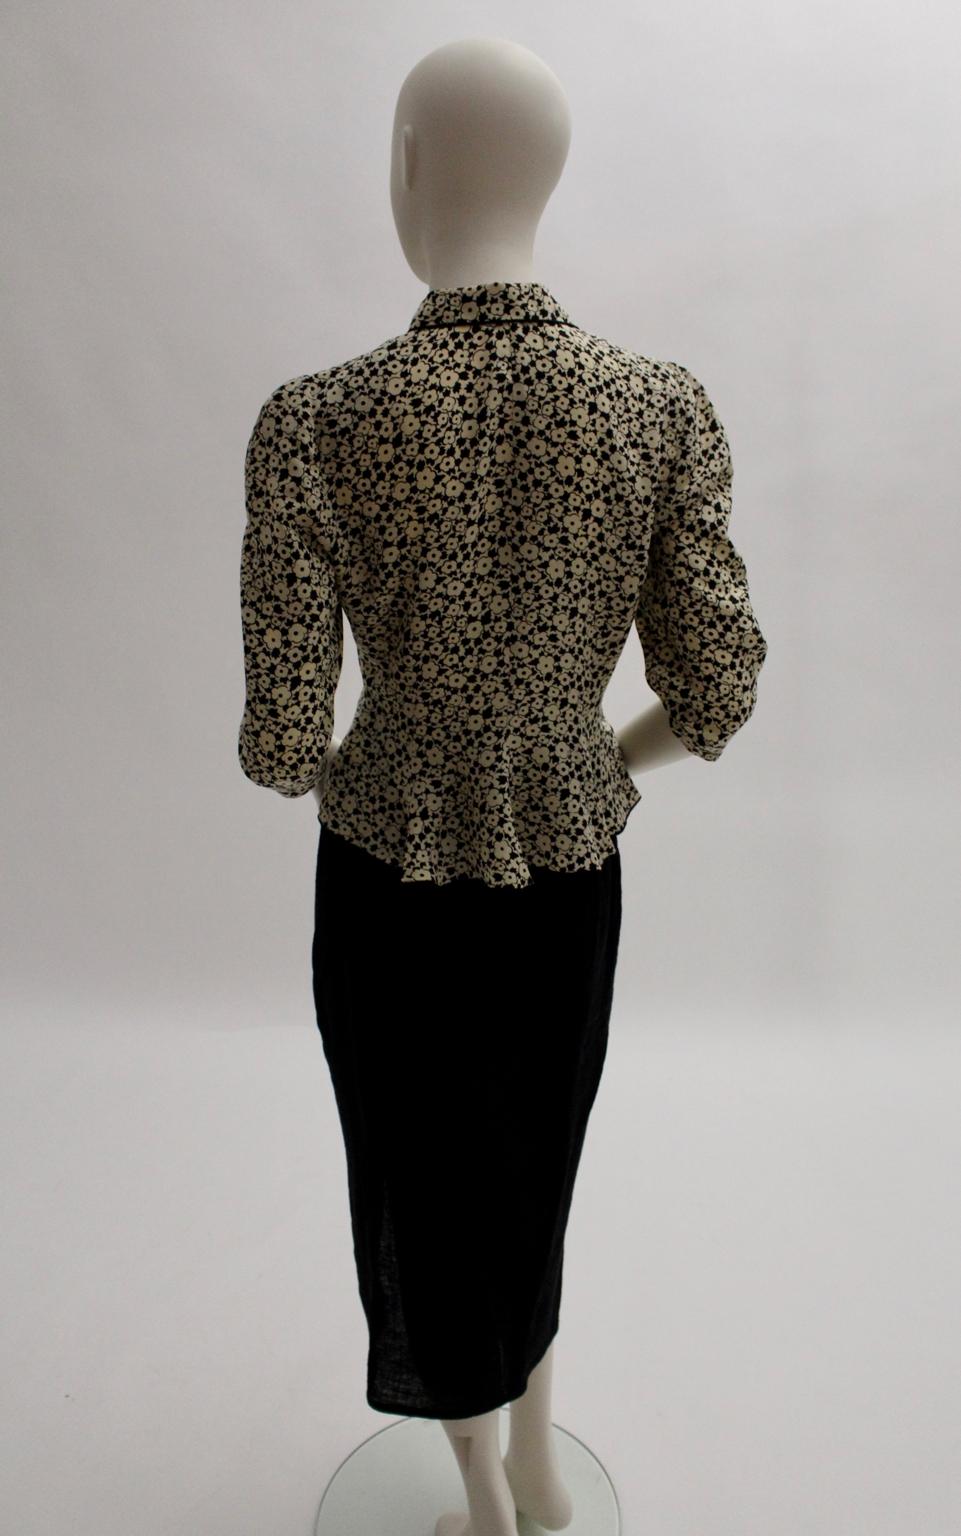 Lolita Lempicka Vintage Silk Blouse with Flower Allover Print  1980s For Sale 8